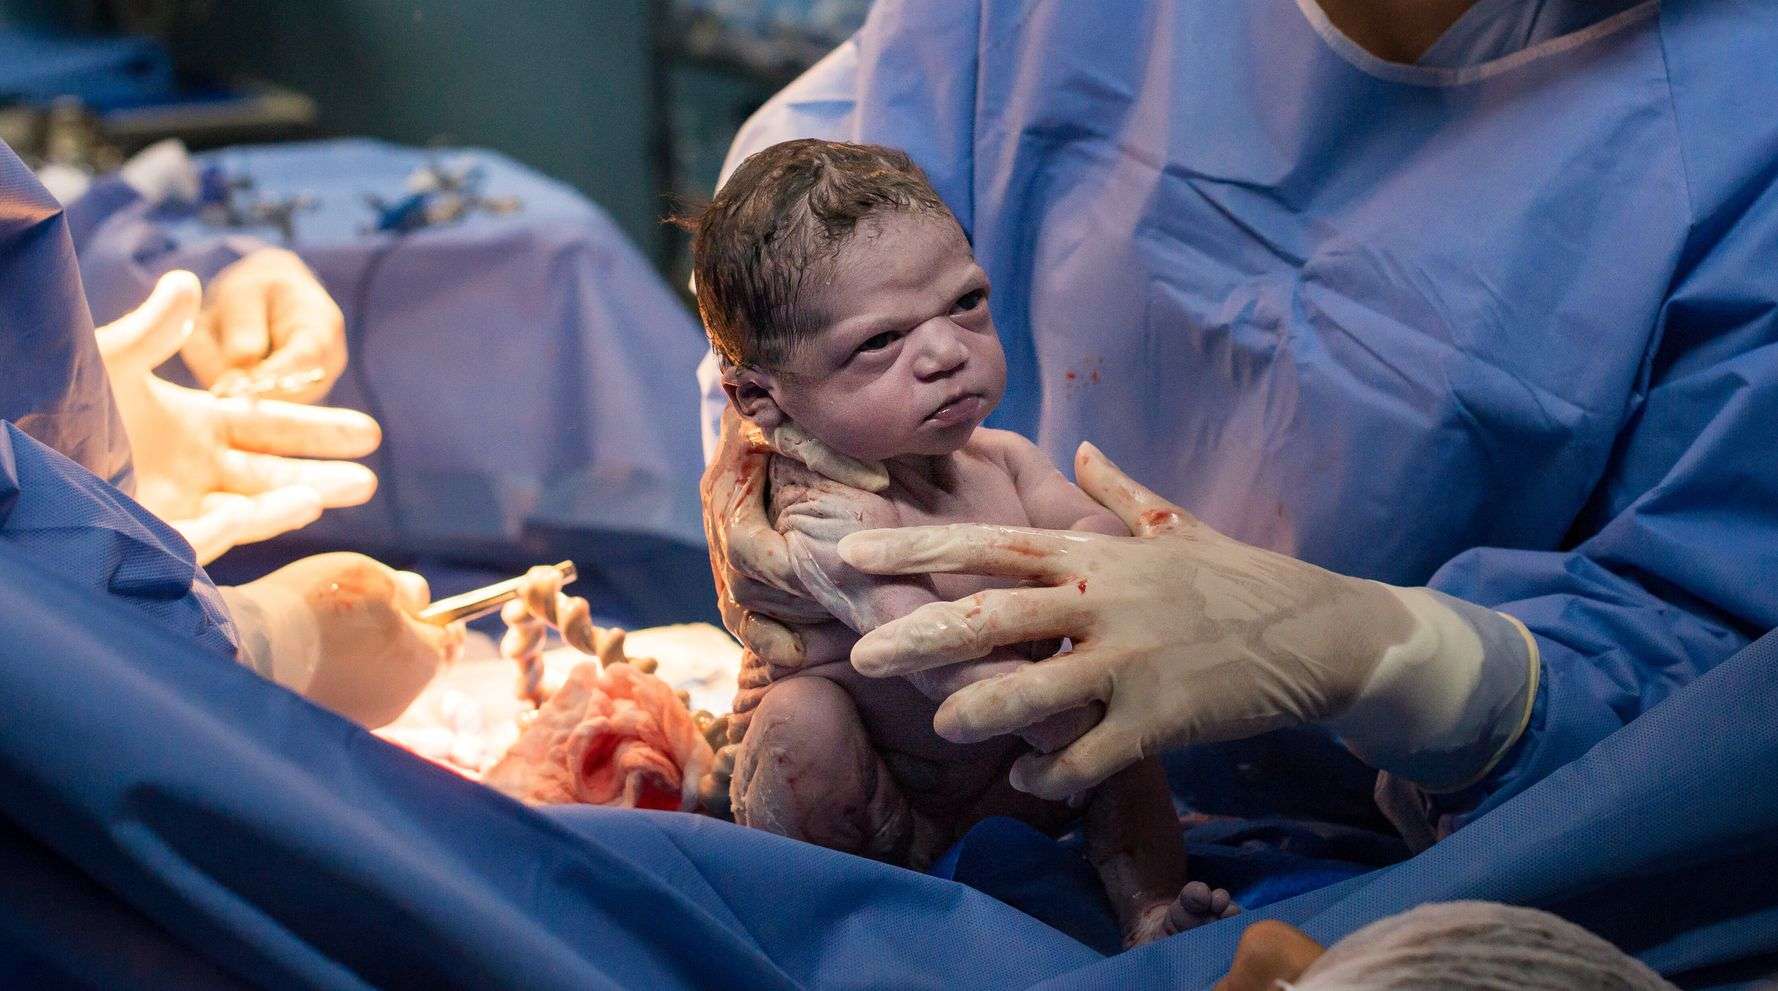 Newborn Makes an Epic Face in a Birth Photo that Went ...